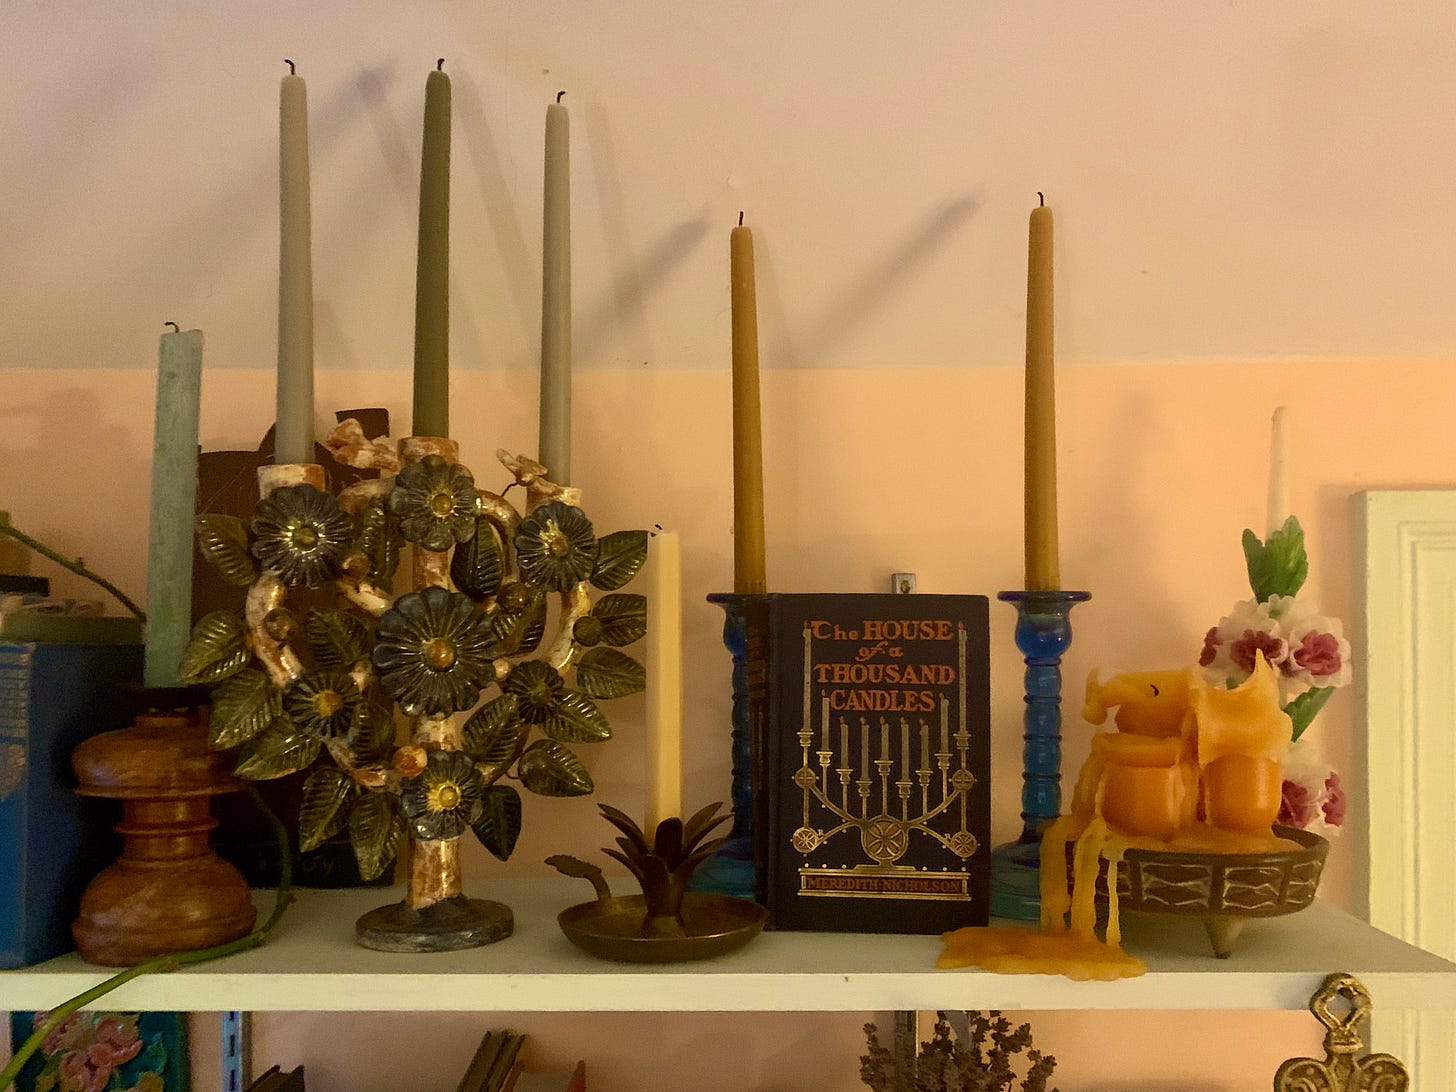 A shelf with nine candles in candleholders of many styles and a book titled The House of a Thousand Candles